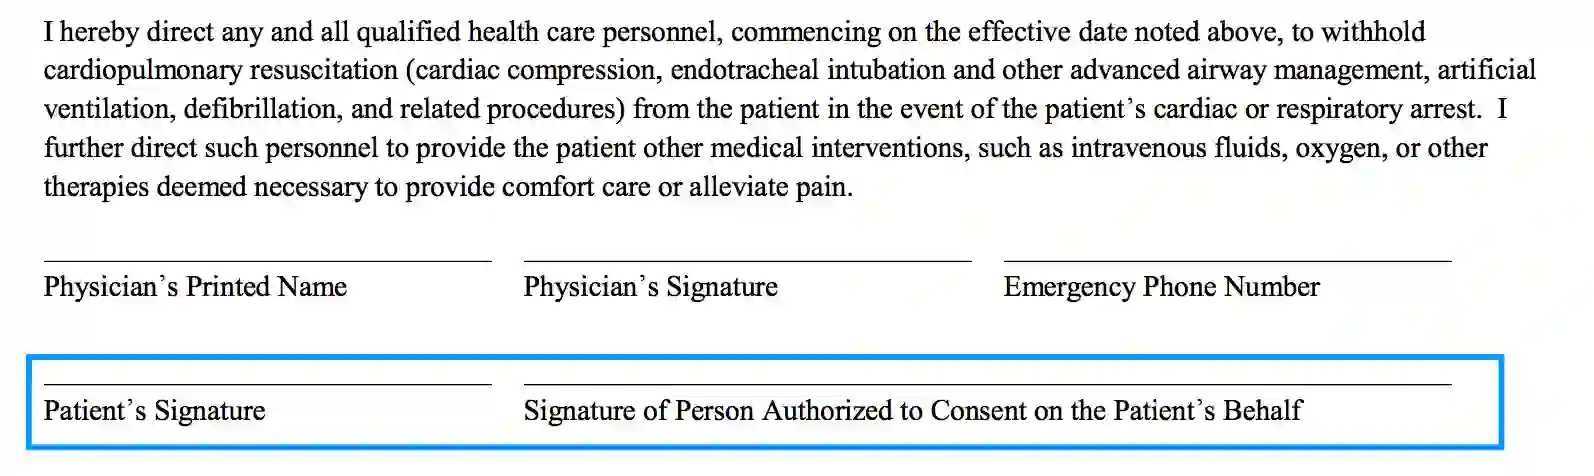 step 3.1 to filling out the virginia dnr form - make the patient and the physician affix their signatures